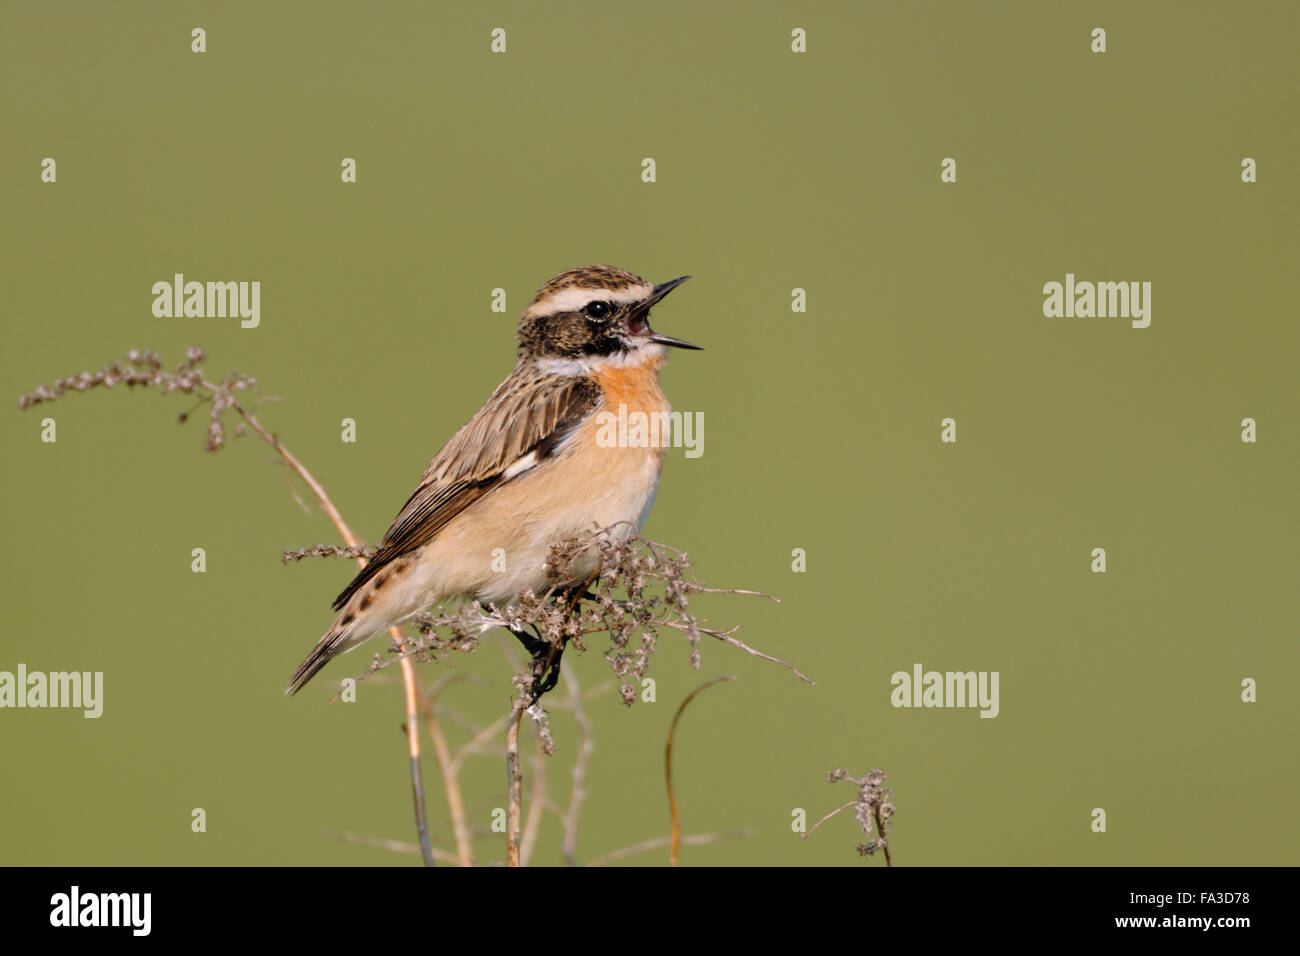 Whinchat / Braunkehlchen ( Saxicola rubetra ) perched on dry twigs in front of clean green background, sings its courtship song. Stock Photo